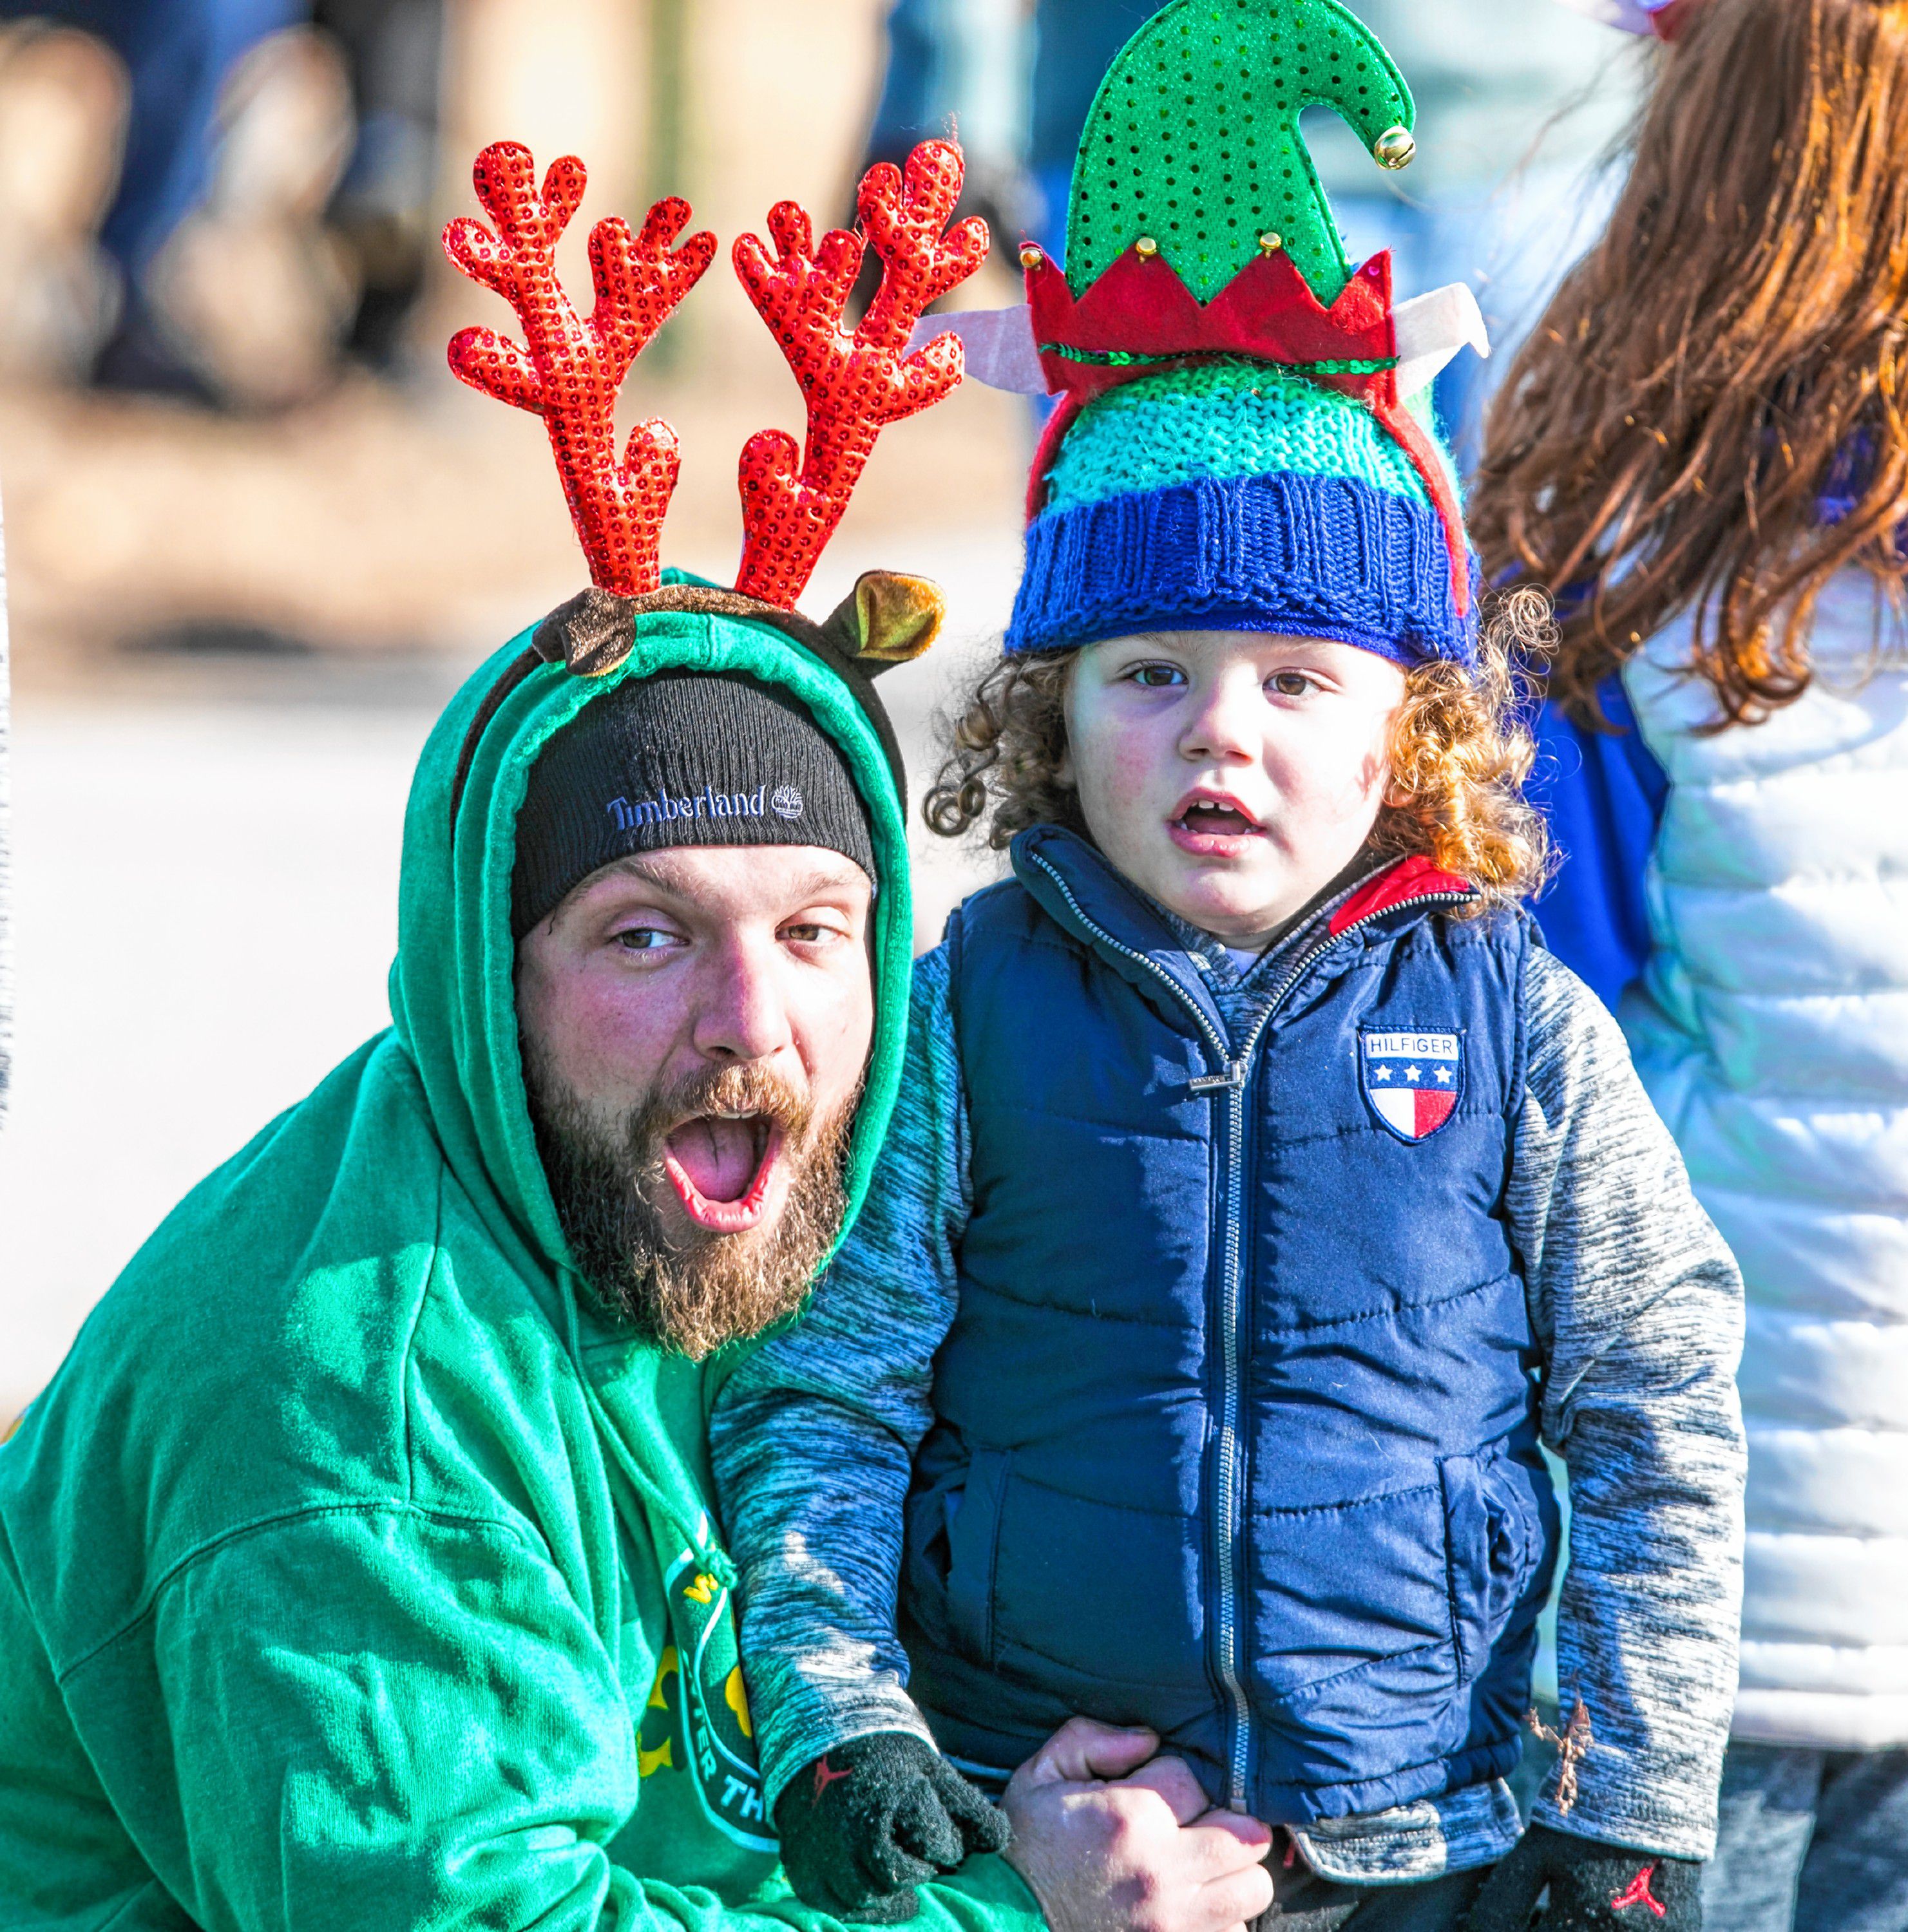 PHOTOS Concord Christmas parade marches on down Loudon Road The